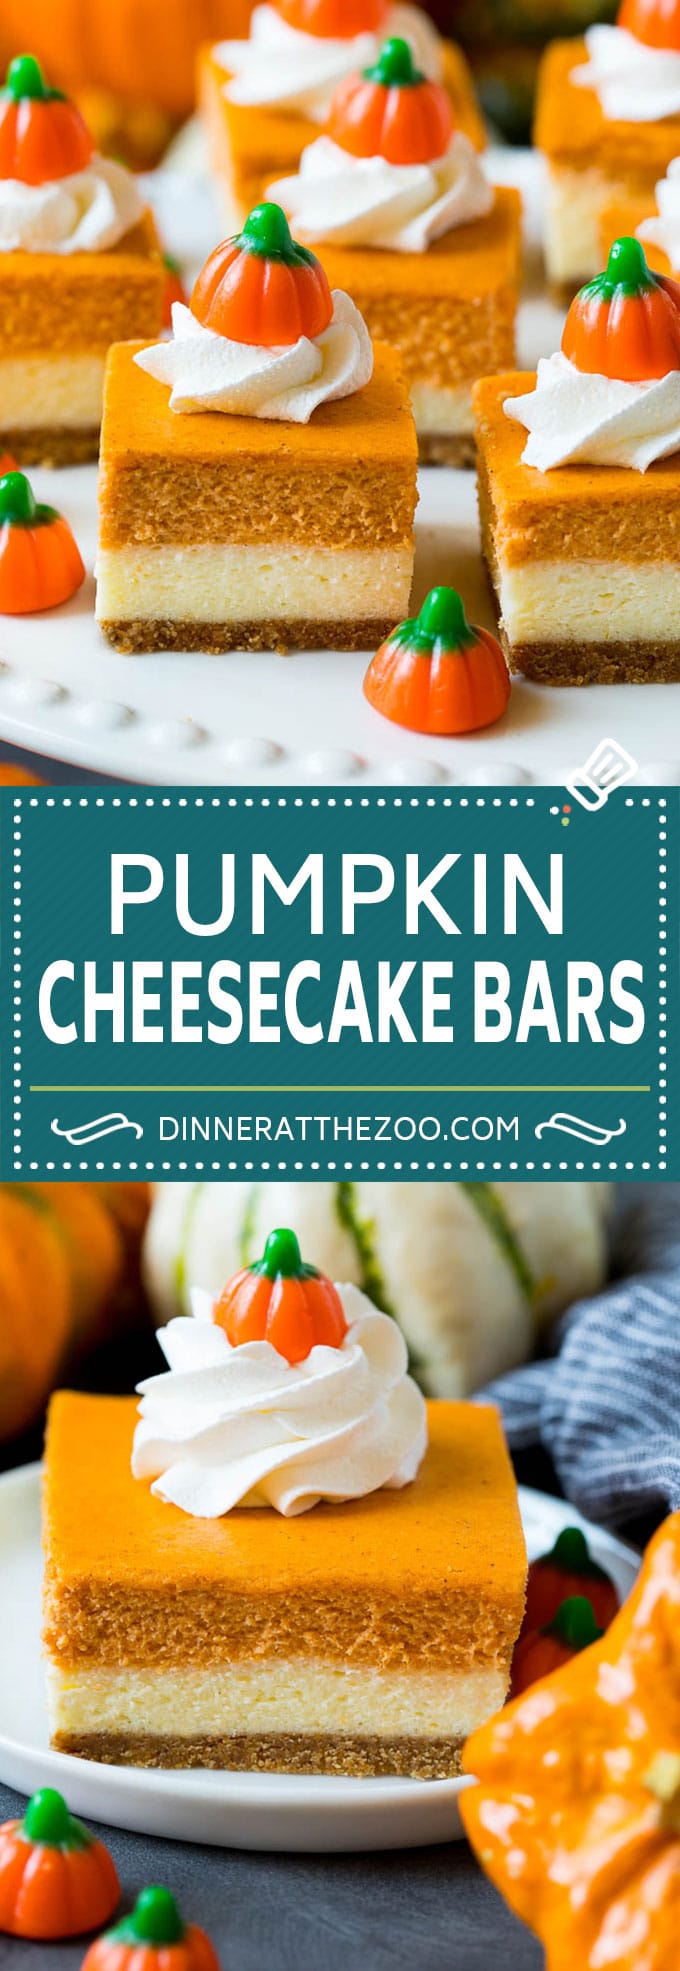 These pumpkin cheesecake bars are layers of graham cracker crust, vanilla cheesecake and pumpkin cheesecake, all baked together to create an impressive dessert.